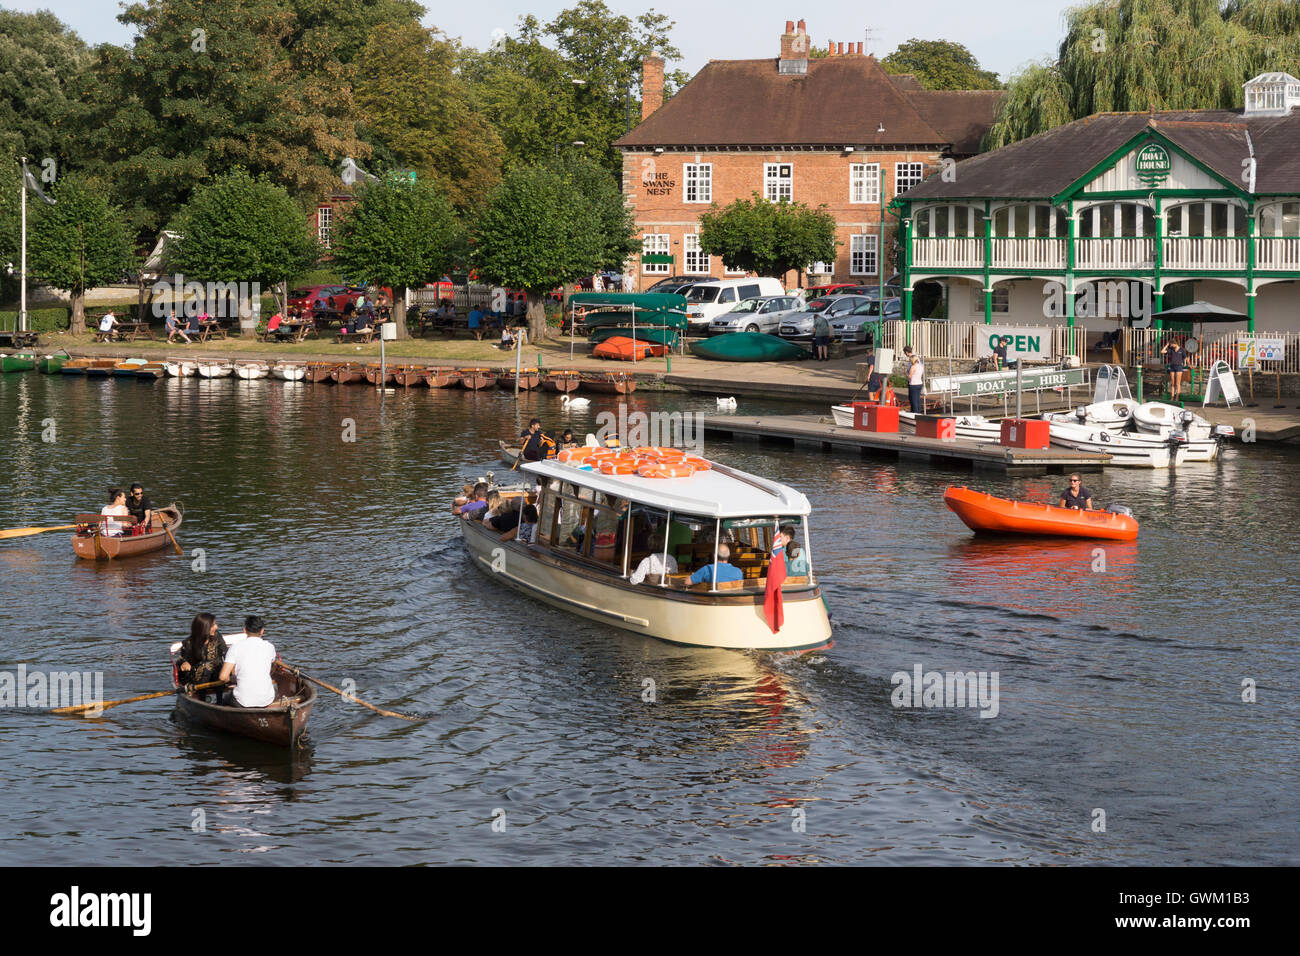 A river boat passes between rowboats as a lifeboat rushes out to instruct the rowers to give way, Stratford-upon-Avon Stock Photo